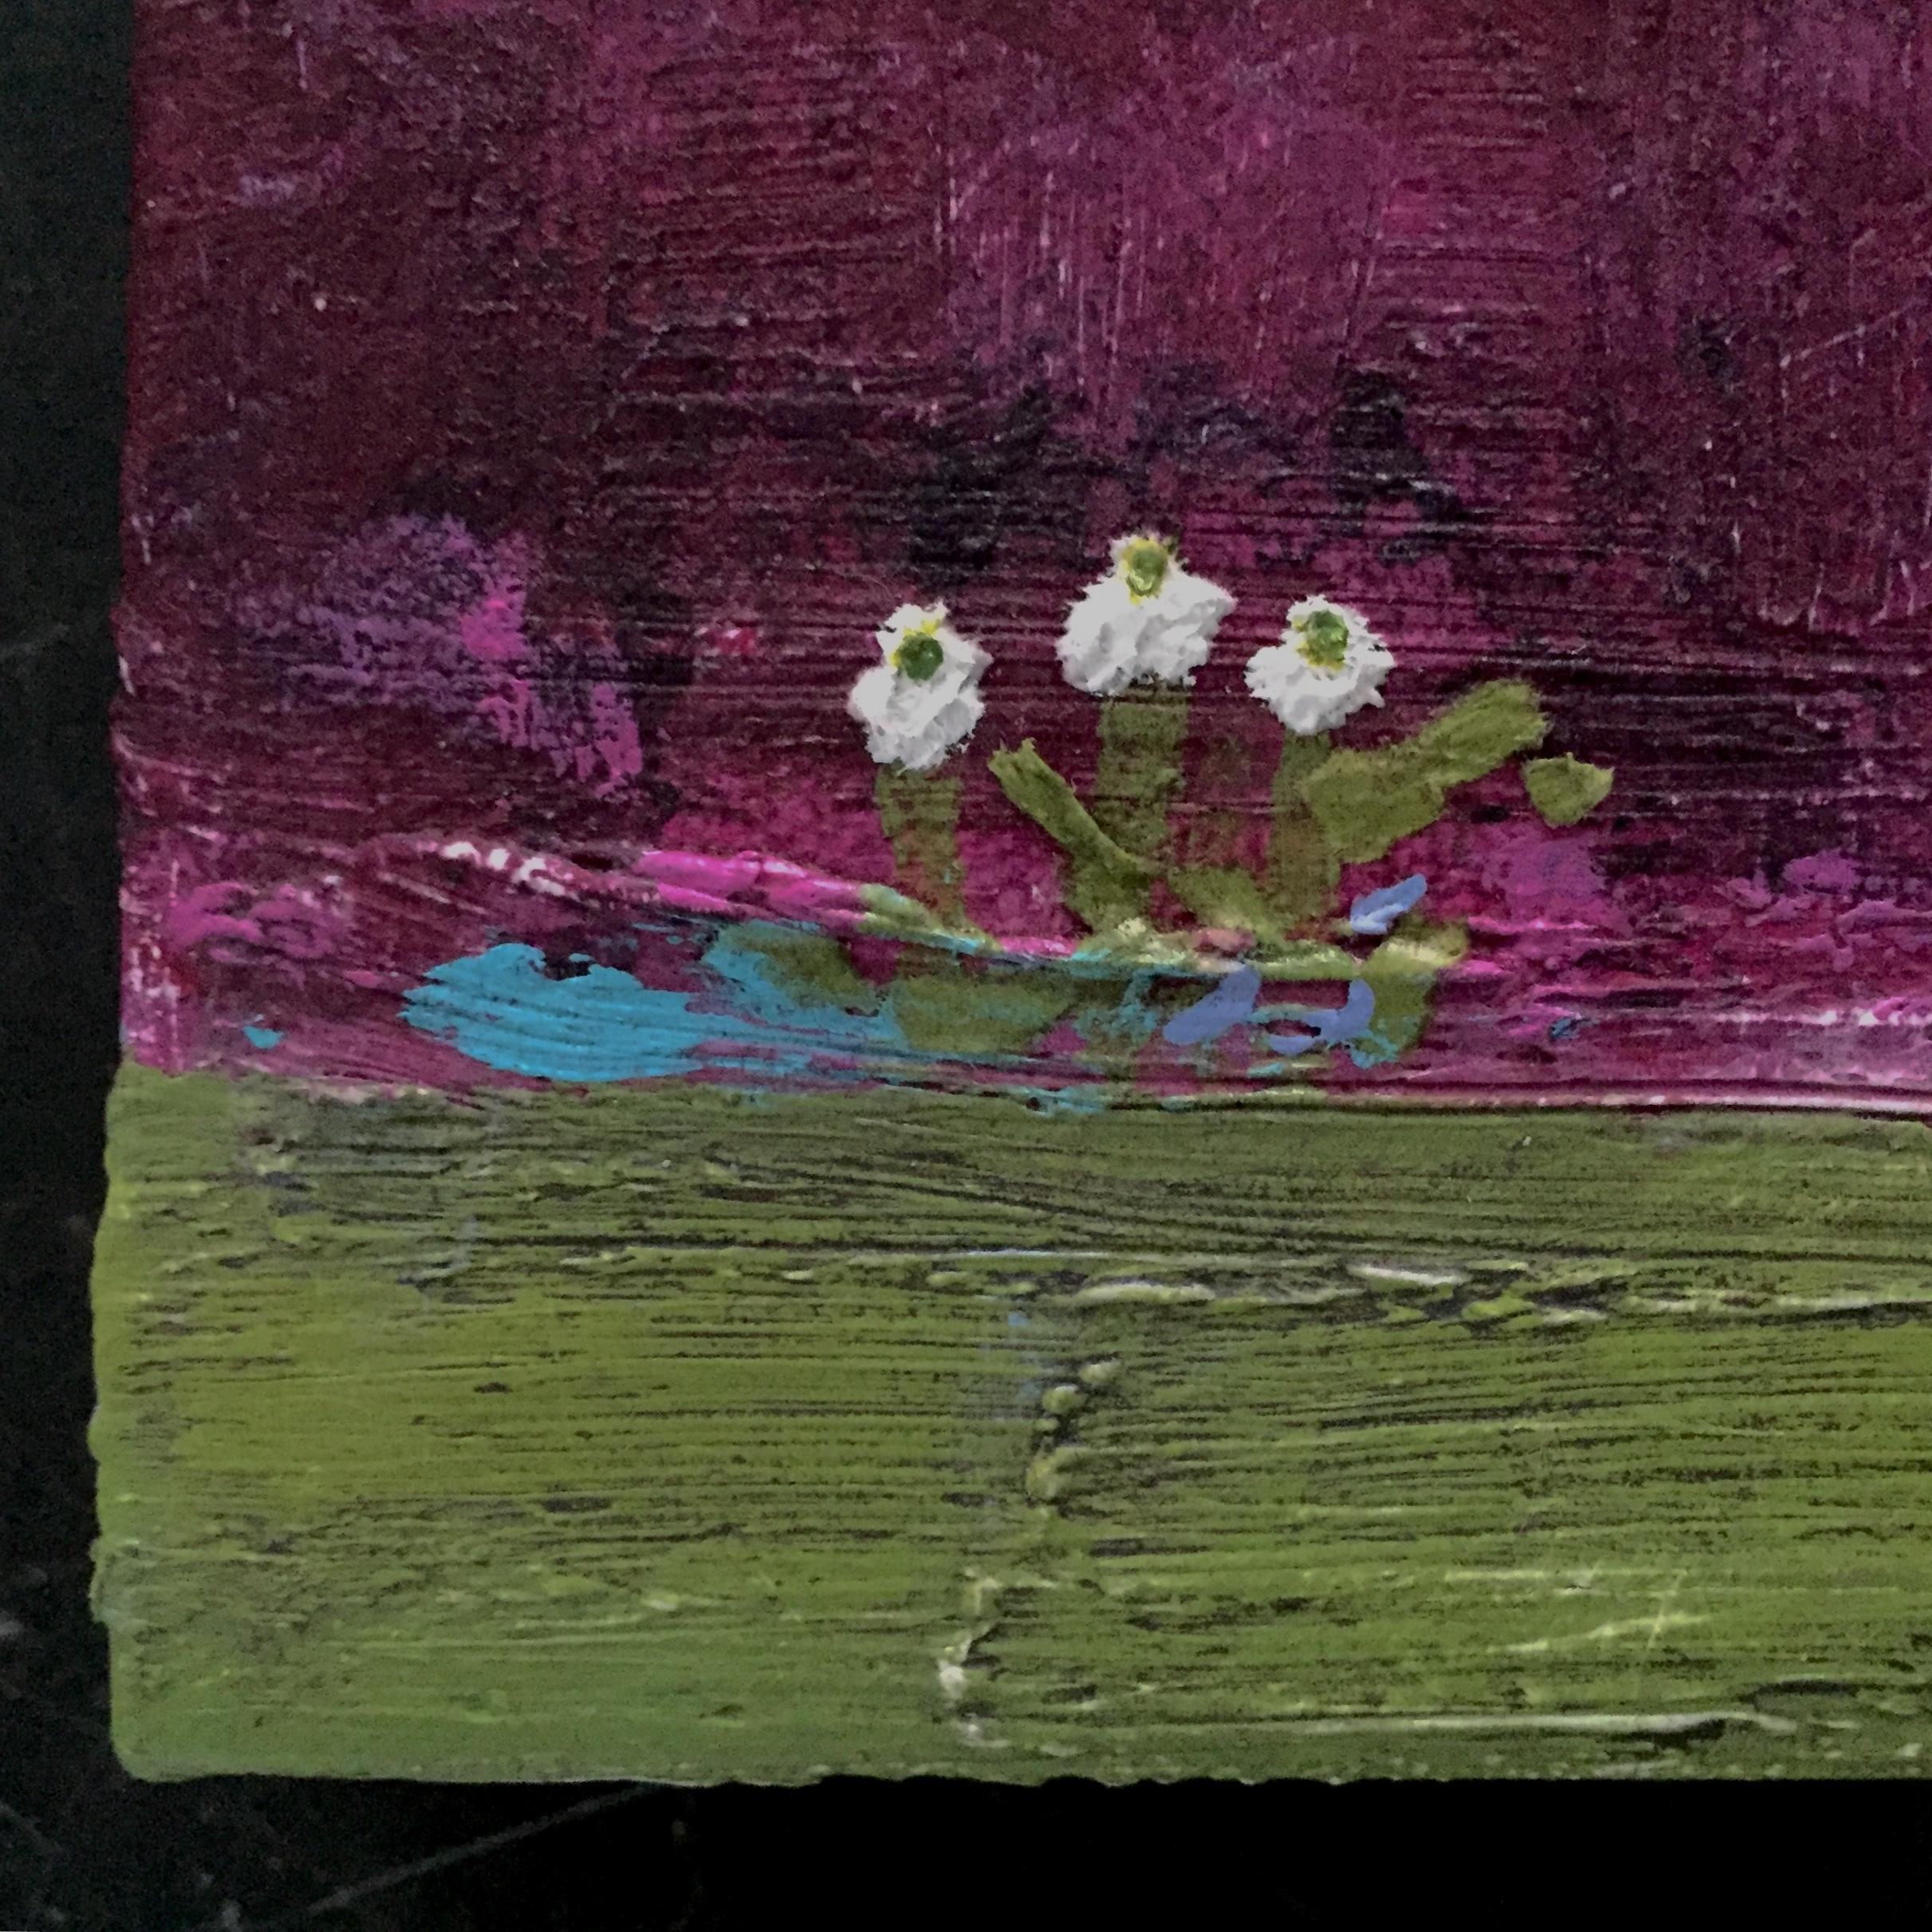 Small paintings make a big statement. In this delicate piece, multi layers of paint build up a textured, impressionistic landscape with the focus on simplified composition. Tiny white flowers pop from a vibrant background of intense colour creating